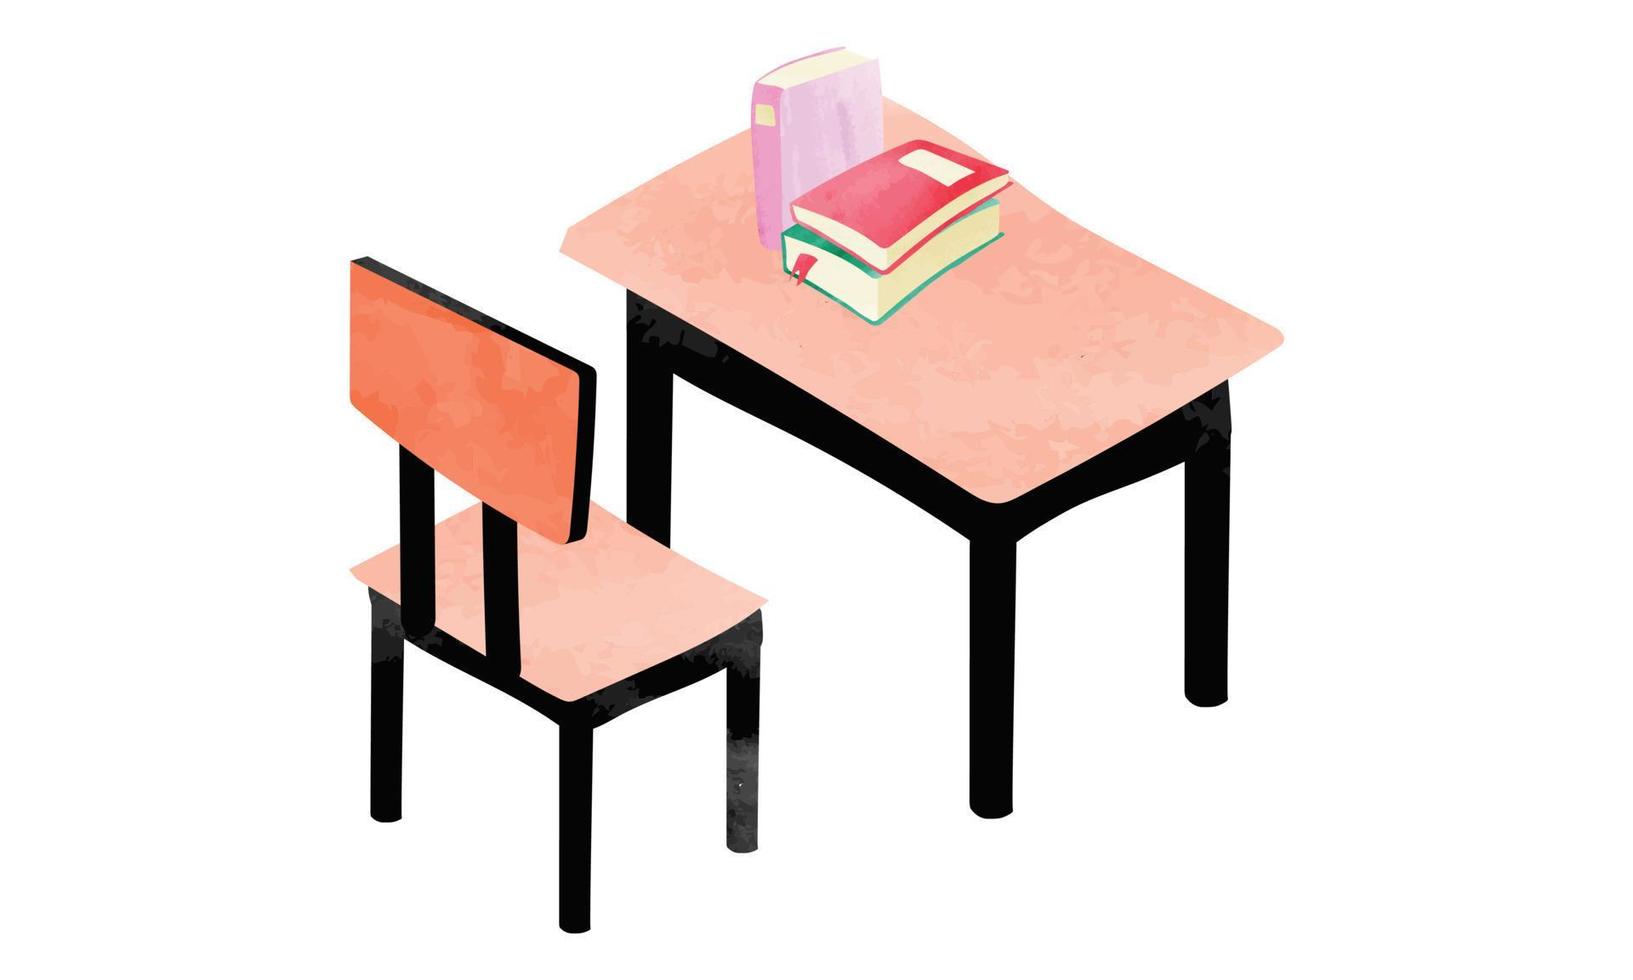 Student desk and chair watercolor style vector illustration isolated on white background. Watercolor school desk and chair clipart. School supplies. Elementary classroom wooden furniture